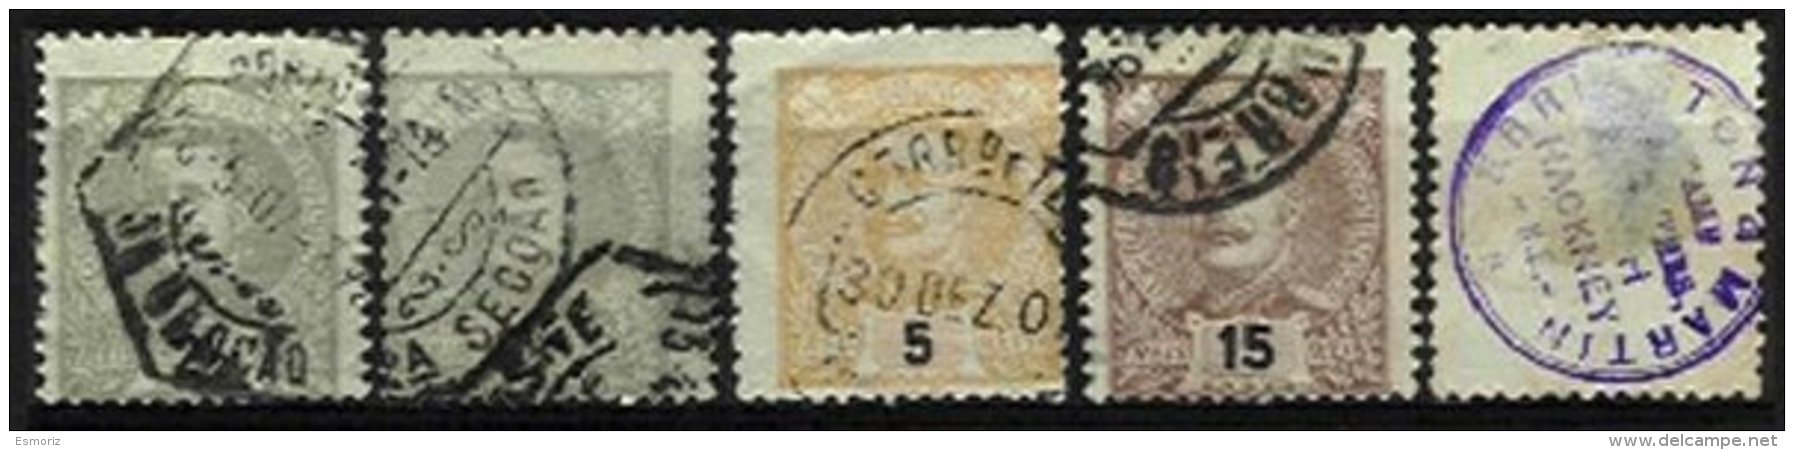 PORTUGAL, AF 126/27, 129, 131: Yv 124/25, 127, 130, Shifted Perfs, Used, F/VF - Unused Stamps